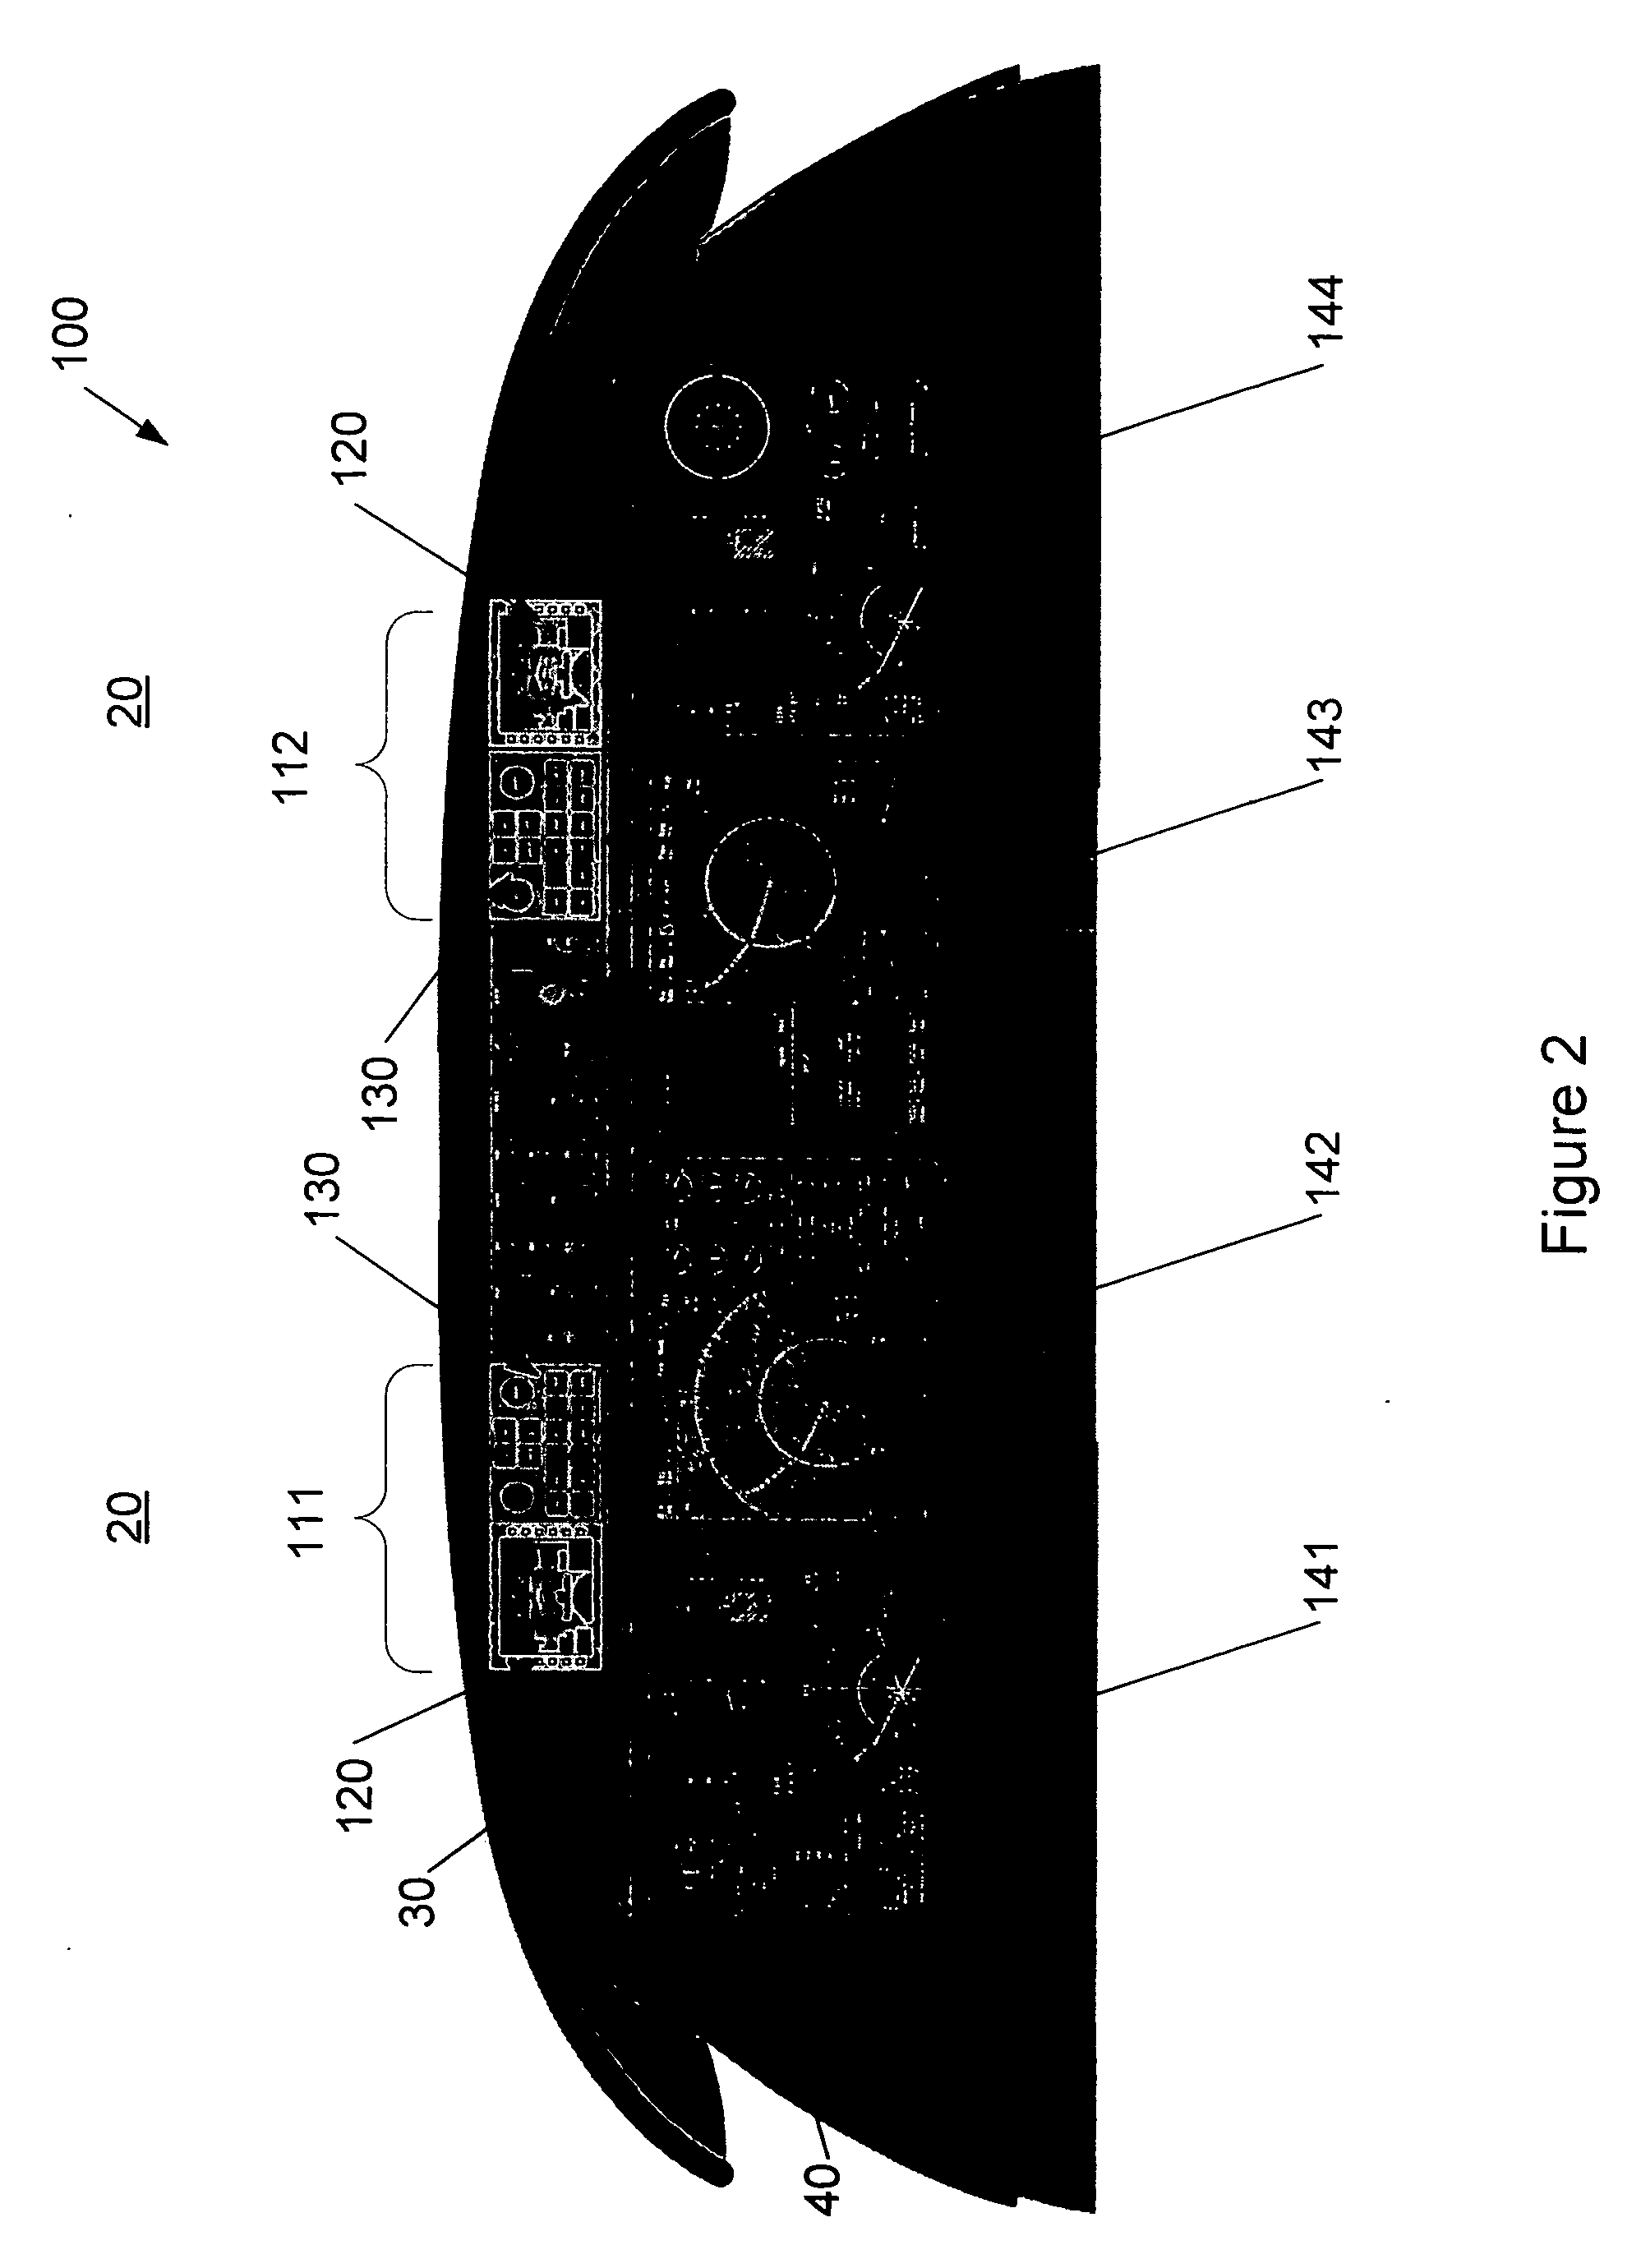 System and method of using a multi-view display